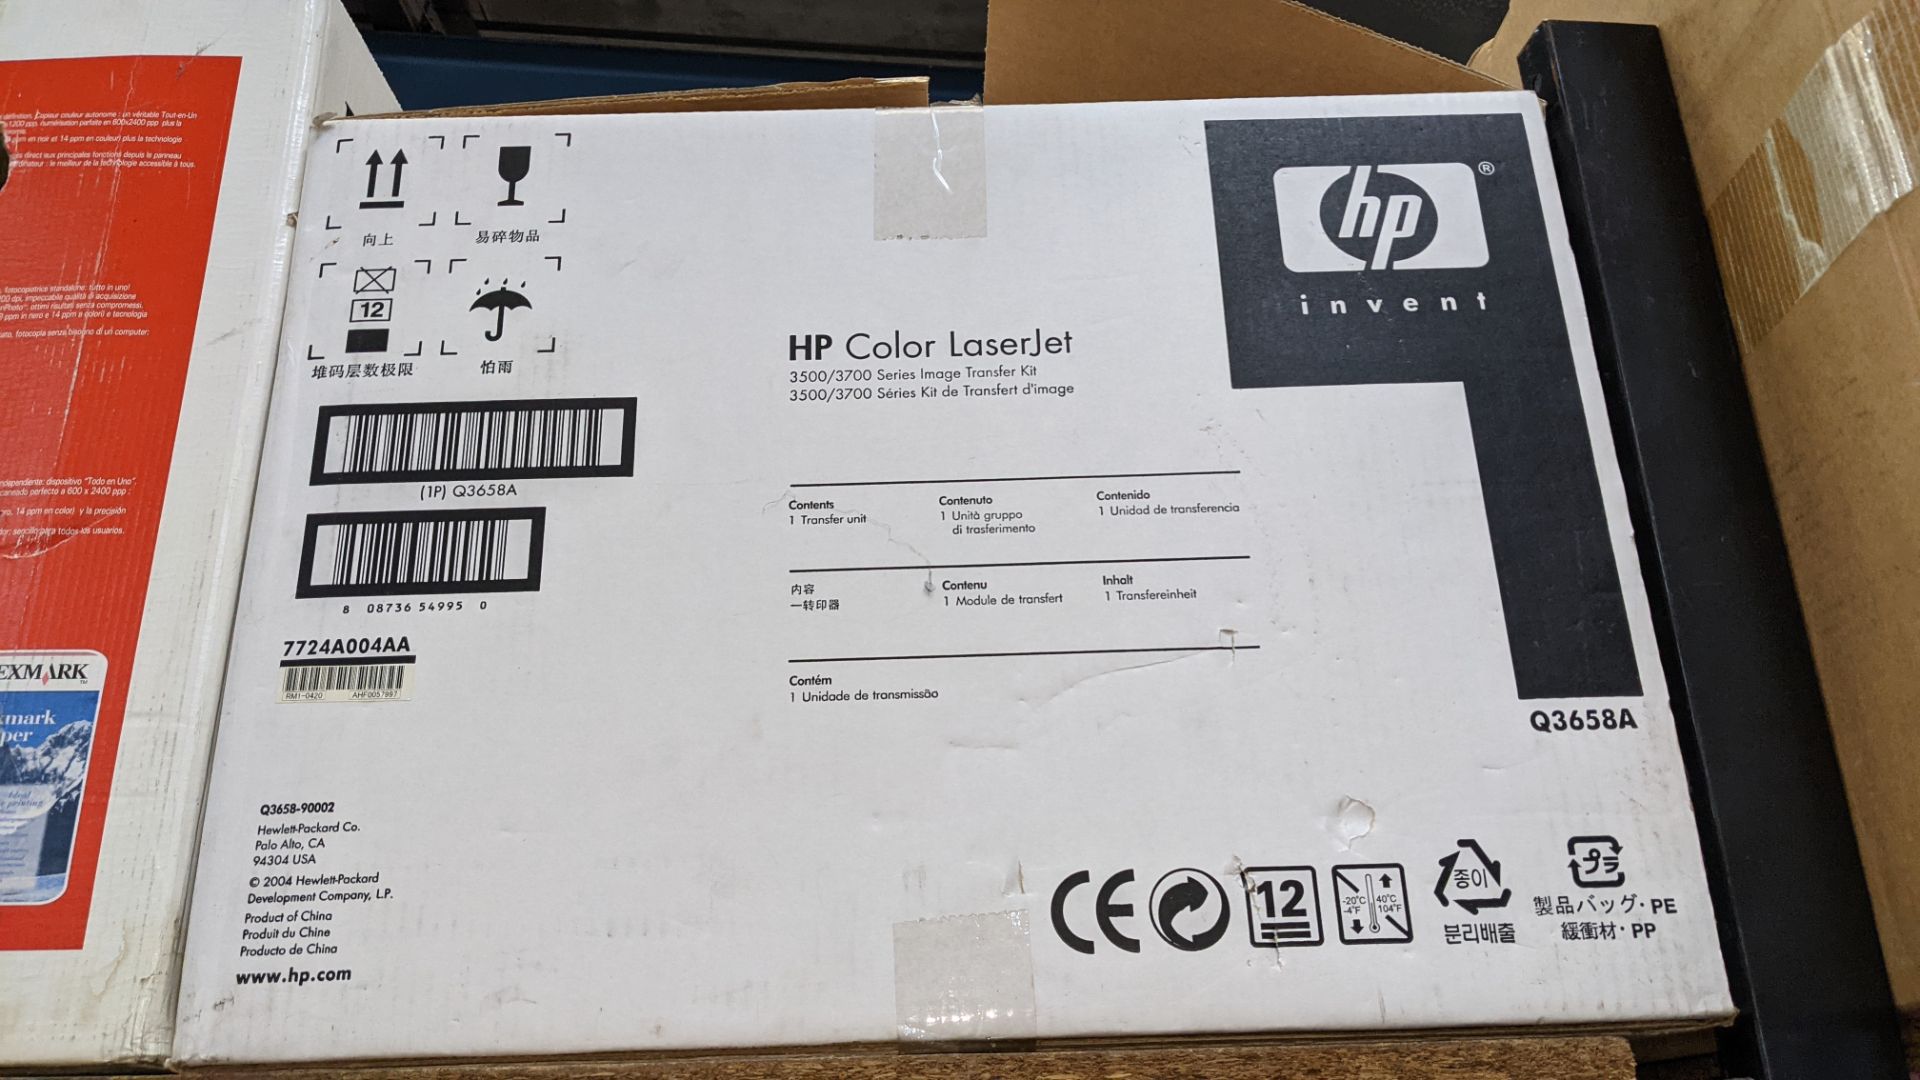 HP Q3658A image transfer kit - appears new/unused & includes box - Image 6 of 6